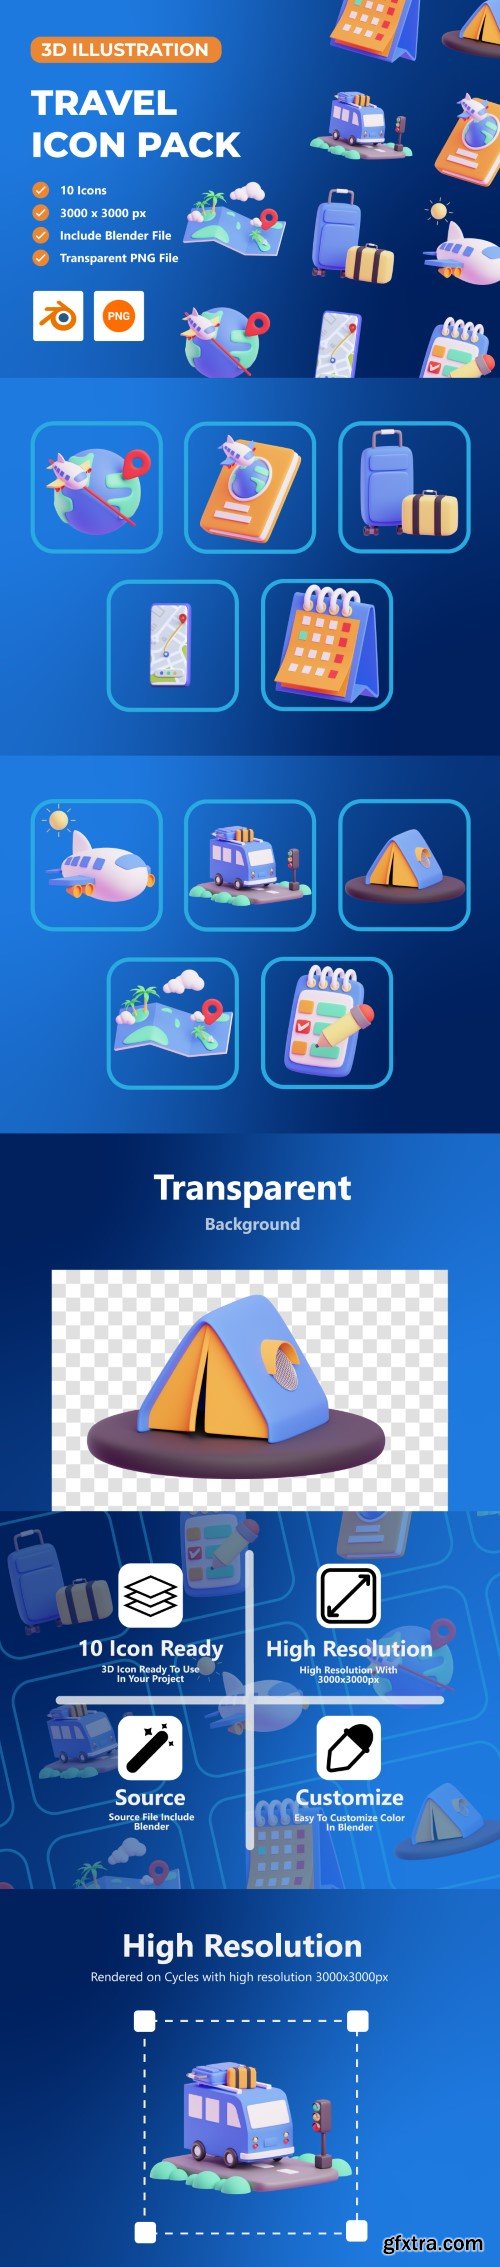 UI8 - Travel 3D Icon Pack